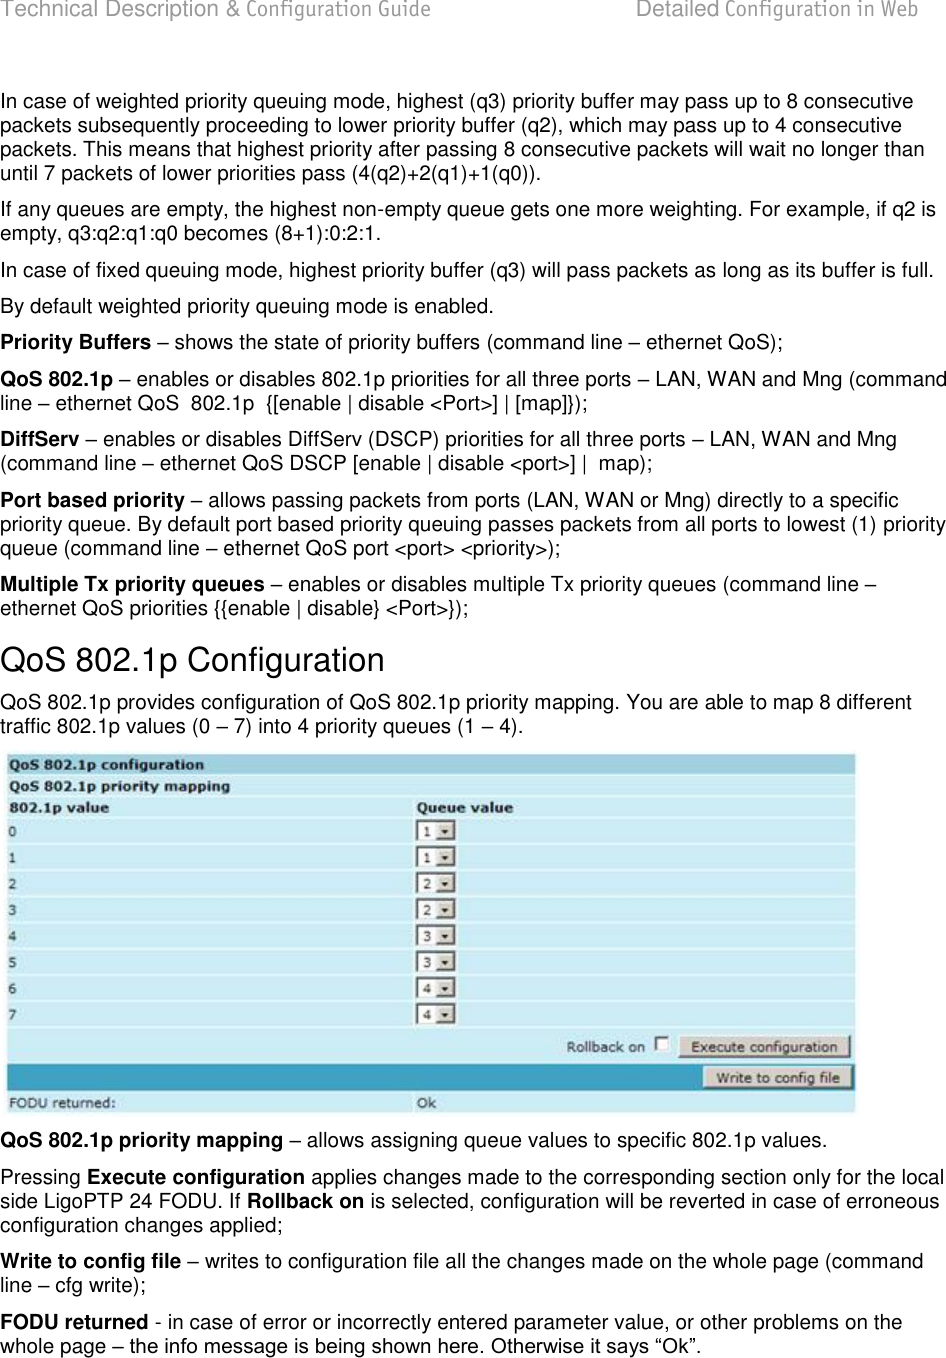 Technical Description &amp; Configuration Guide  Detailed Configuration in Web  LigoWave  Page 55 In case of weighted priority queuing mode, highest (q3) priority buffer may pass up to 8 consecutive packets subsequently proceeding to lower priority buffer (q2), which may pass up to 4 consecutive packets. This means that highest priority after passing 8 consecutive packets will wait no longer than until 7 packets of lower priorities pass (4(q2)+2(q1)+1(q0)). If any queues are empty, the highest non-empty queue gets one more weighting. For example, if q2 is empty, q3:q2:q1:q0 becomes (8+1):0:2:1. In case of fixed queuing mode, highest priority buffer (q3) will pass packets as long as its buffer is full. By default weighted priority queuing mode is enabled. Priority Buffers  shows the state of priority buffers (command line  ethernet QoS); QoS 802.1p  enables or disables 802.1p priorities for all three ports  LAN, WAN and Mng (command line  ethernet QoS  802.1p  {[enable | disable &lt;Port&gt;] | [map]}); DiffServ  enables or disables DiffServ (DSCP) priorities for all three ports  LAN, WAN and Mng (command line  ethernet QoS DSCP [enable | disable &lt;port&gt;] |  map); Port based priority  allows passing packets from ports (LAN, WAN or Mng) directly to a specific priority queue. By default port based priority queuing passes packets from all ports to lowest (1) priority queue (command line  ethernet QoS port &lt;port&gt; &lt;priority&gt;); Multiple Tx priority queues  enables or disables multiple Tx priority queues (command line  ethernet QoS priorities {{enable | disable} &lt;Port&gt;}); QoS 802.1p Configuration QoS 802.1p provides configuration of QoS 802.1p priority mapping. You are able to map 8 different traffic 802.1p values (0  7) into 4 priority queues (1  4).  QoS 802.1p priority mapping  allows assigning queue values to specific 802.1p values. Pressing Execute configuration applies changes made to the corresponding section only for the local side LigoPTP 24 FODU. If Rollback on is selected, configuration will be reverted in case of erroneous configuration changes applied; Write to config file  writes to configuration file all the changes made on the whole page (command line  cfg write); FODU returned - in case of error or incorrectly entered parameter value, or other problems on the whole page      